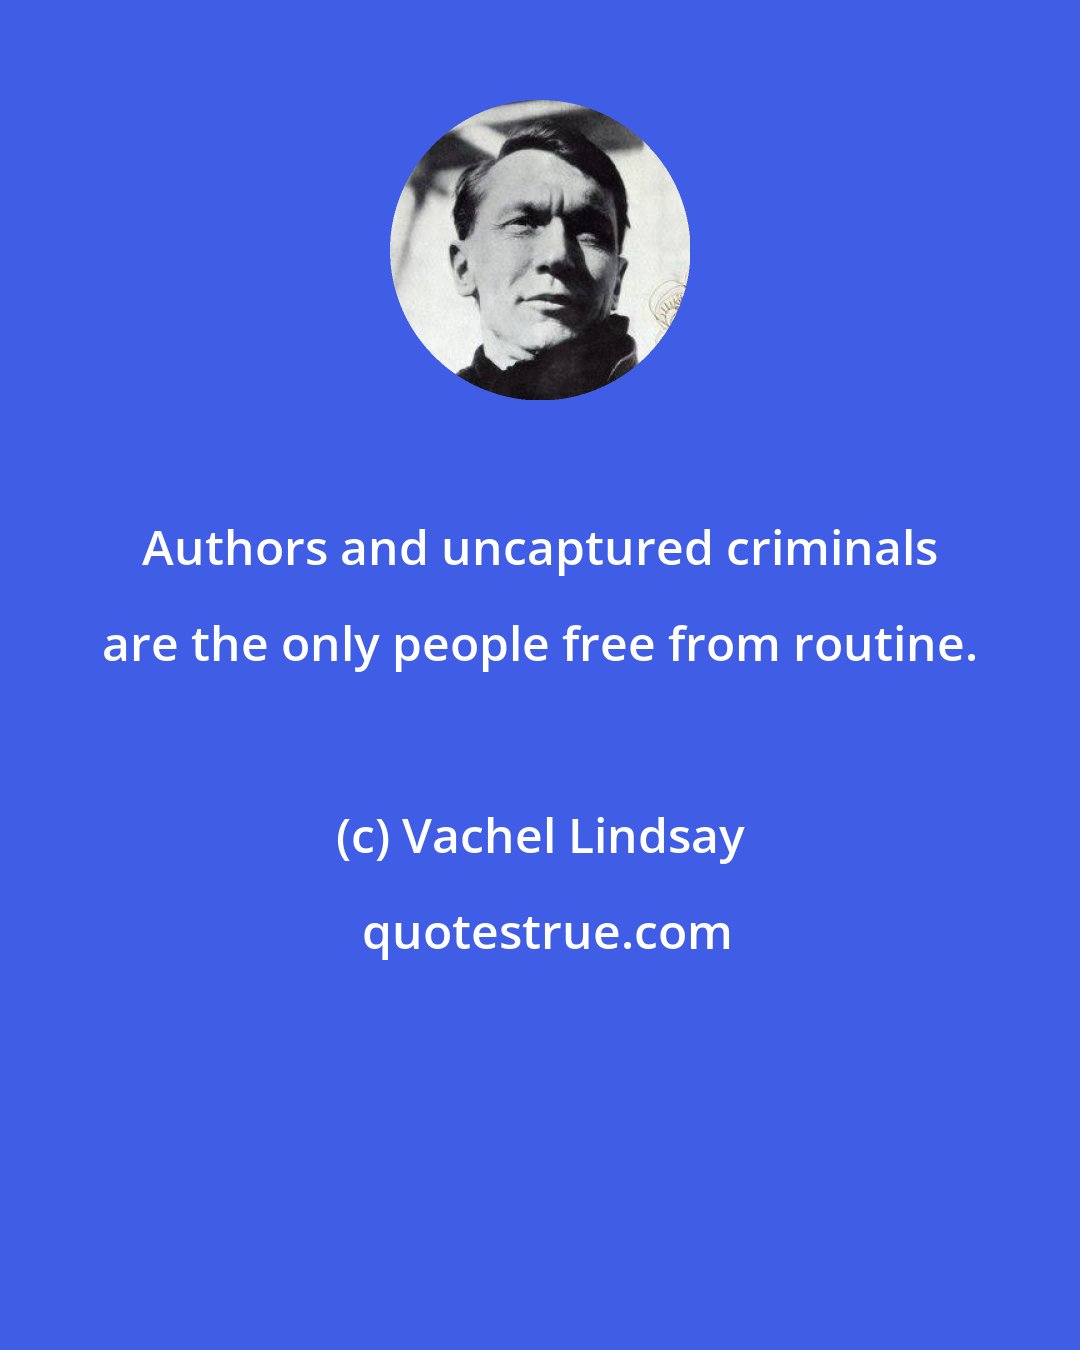 Vachel Lindsay: Authors and uncaptured criminals are the only people free from routine.